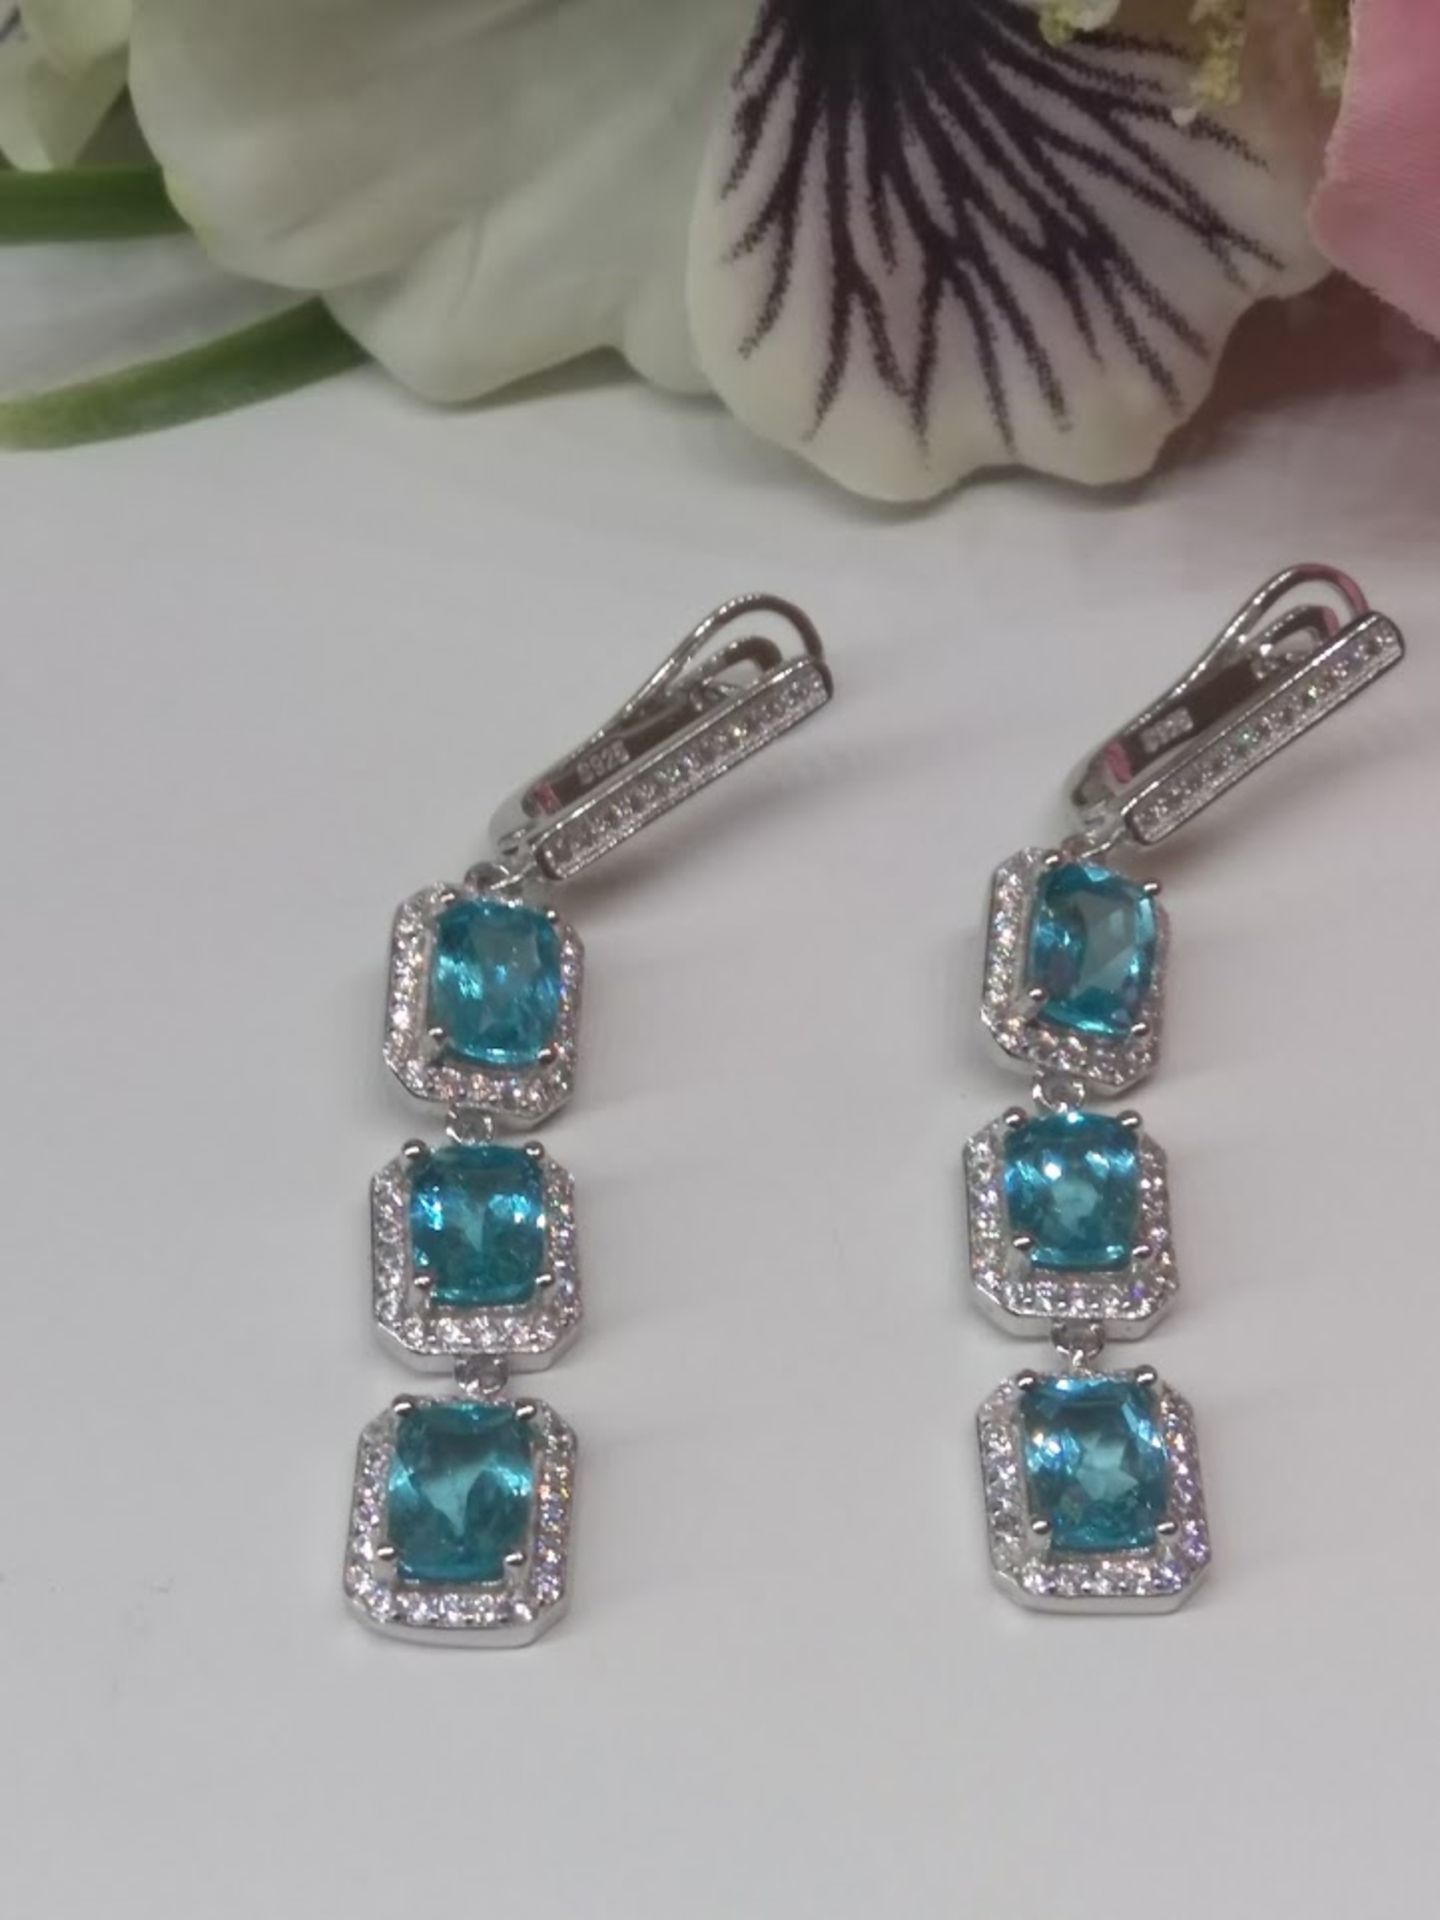 Deluxe Antique Cut Top Neon Blue Natural Apatite Gemstone Earrings, Bespoke - Unique - Image 2 of 2